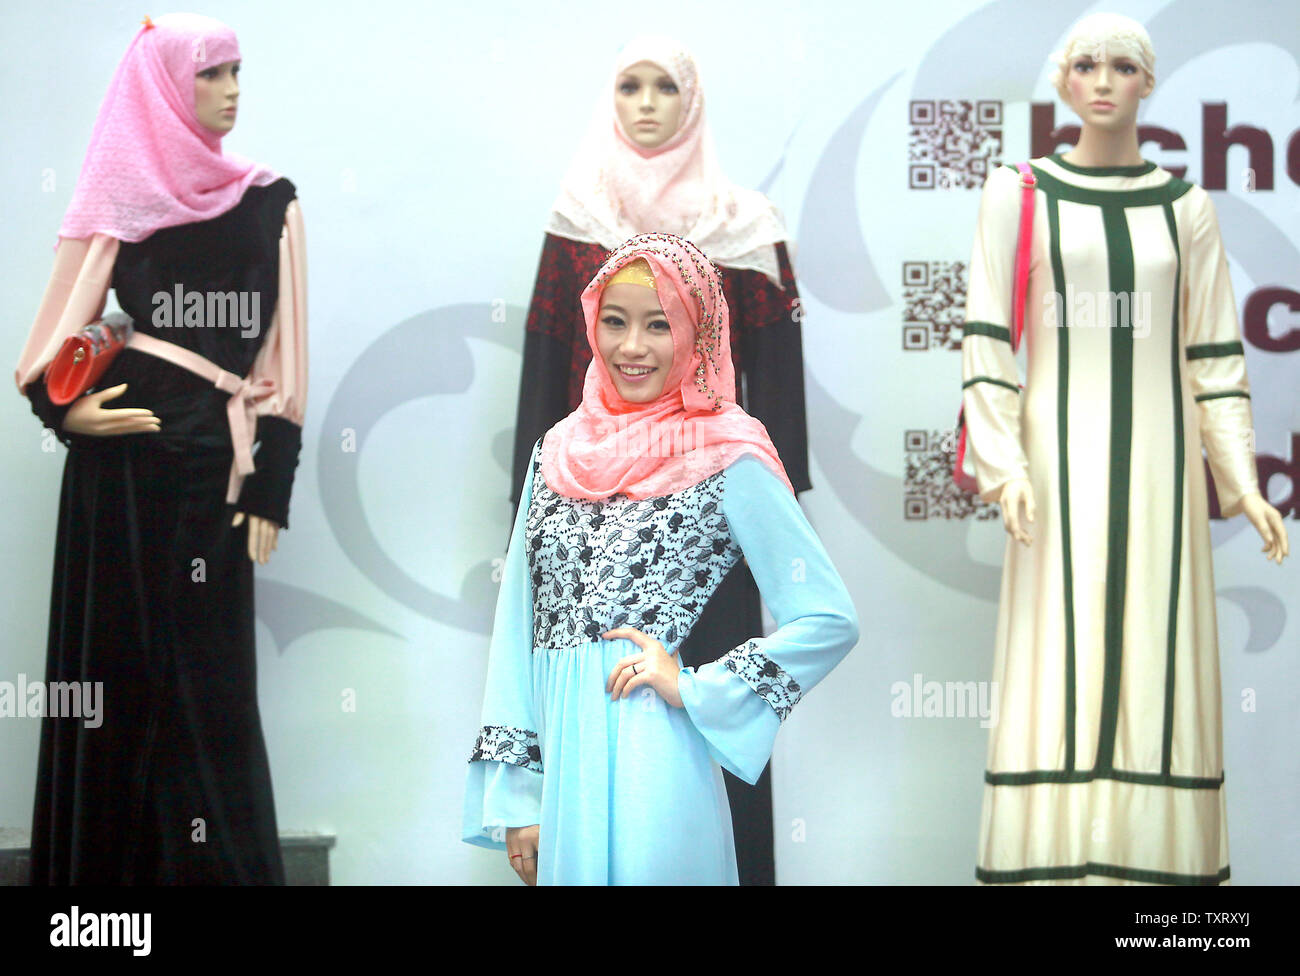 Chinese Muslim women display traditional religious clothing at a booth during the opening of the China-Arab State Expo beijing held in Yinchuan, the capital of China's northwestern Ningxia Hui Autonomous Region on September 15, 2013.  Yinchuan, a predominantly Muslim city and a major crossroad between China and her Muslim neighbors, is being developed as the capital of China-Arab bilateral trade.    UPI/Stephen Shaver Stock Photo